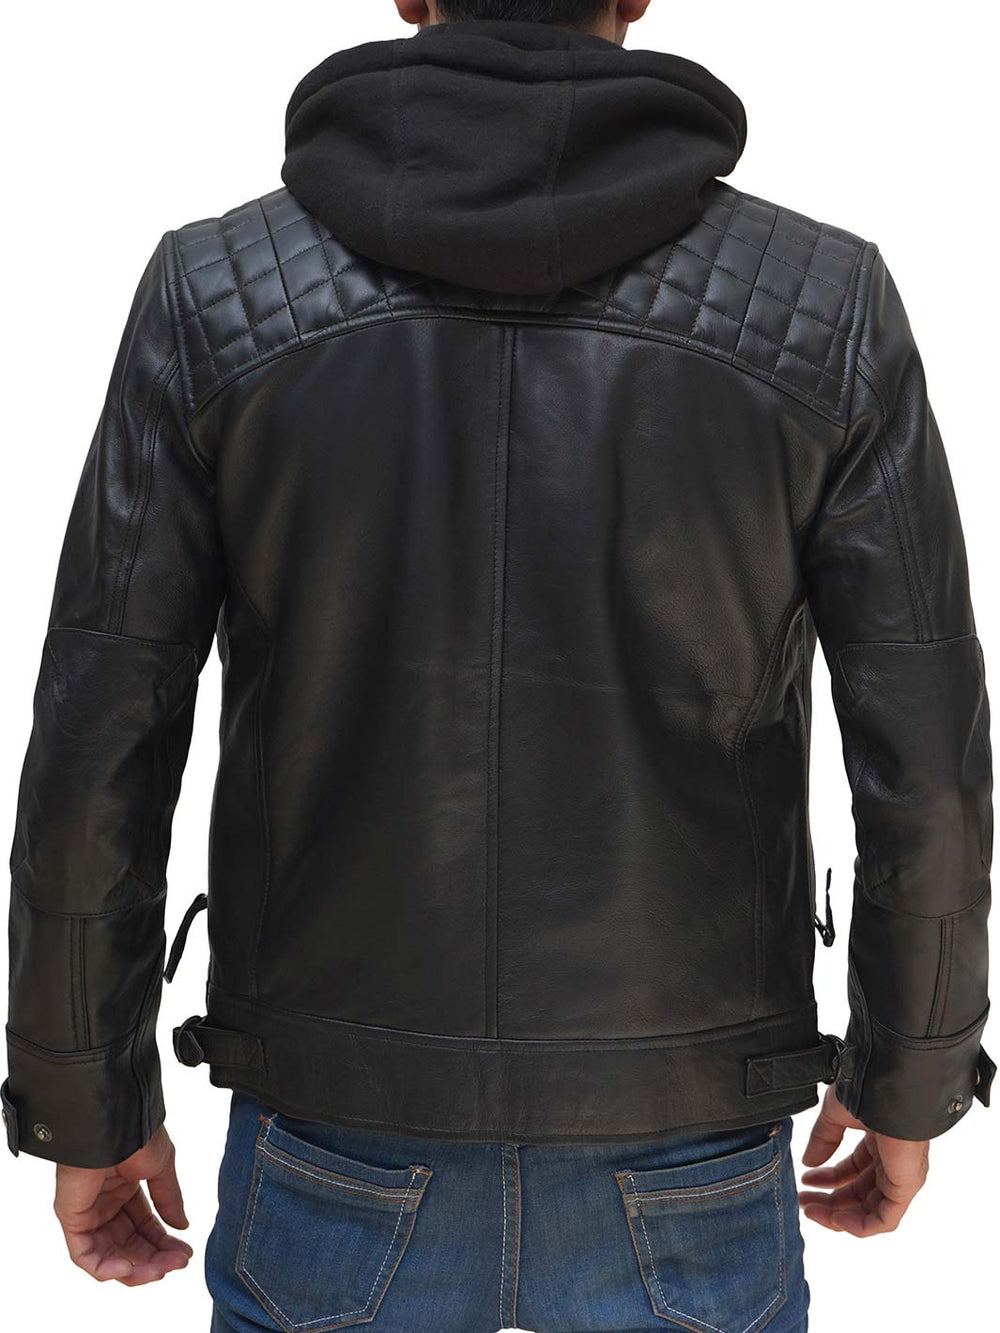 Mens Black Leather Jacket with Removable Hood